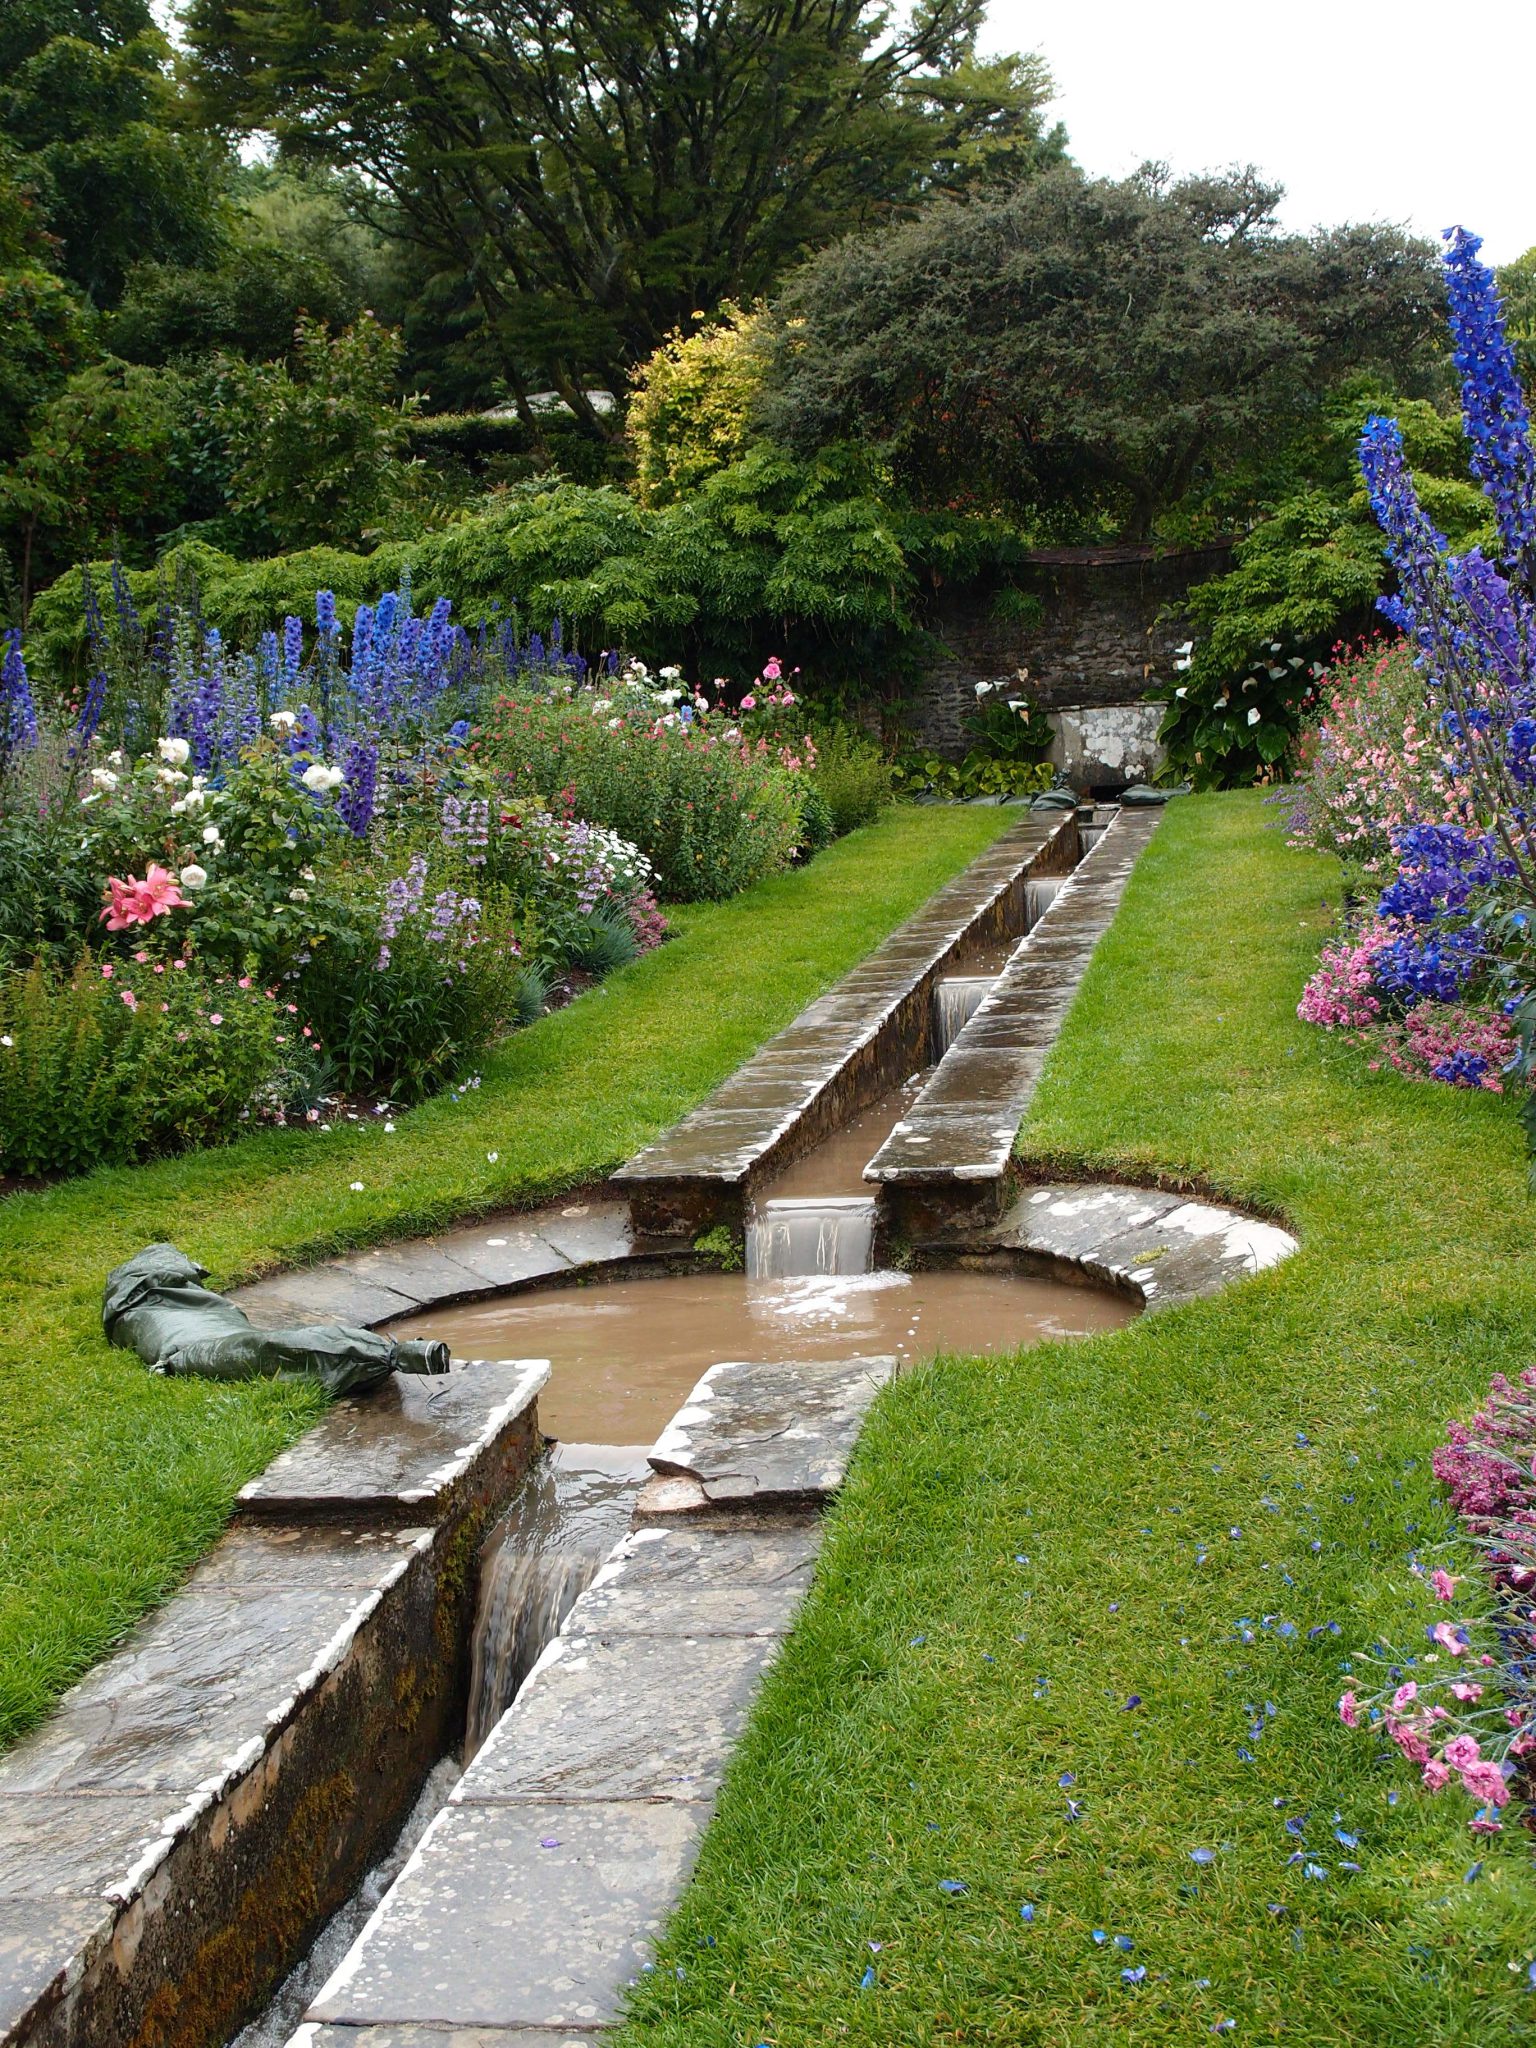  The Rill Garden was designed by Oswald Milne. This hillside garden is bisected by a narrow, canalized stream and a small, central pool. Lady Dorothy originally planted many pastel-colored rose bushes here, but those shrubs failed, in the seaside air. Semi-tender perennials now fill the Rill Garden. 